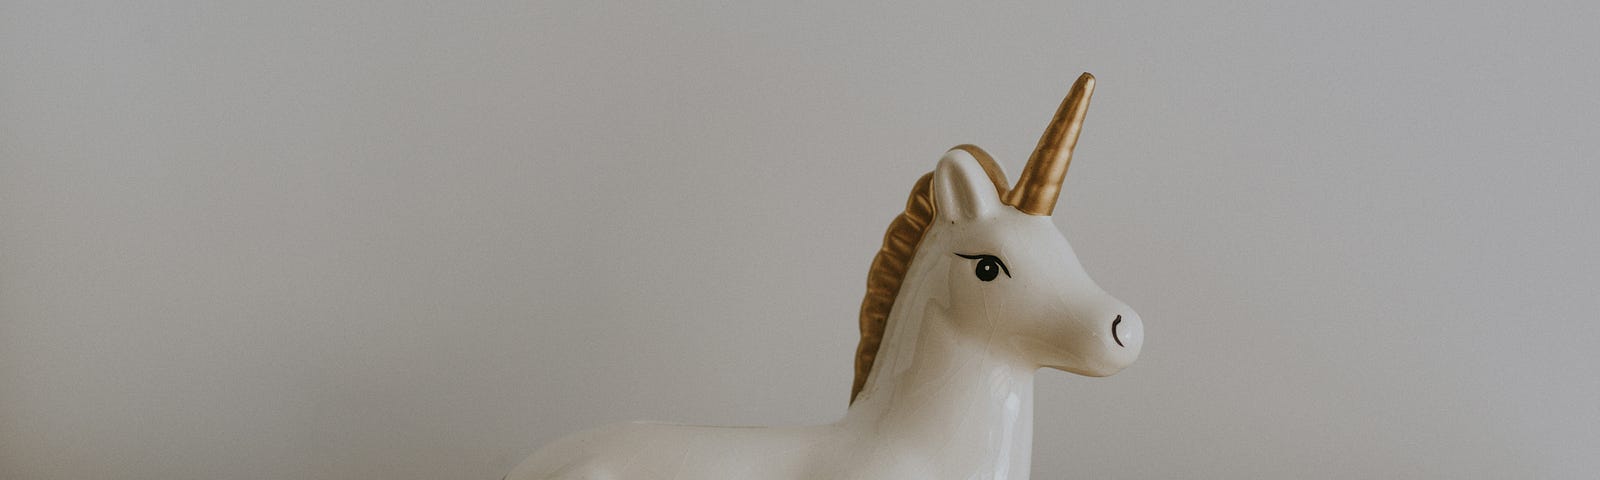 A porceilin unicorn sitting in front of piles of cents.